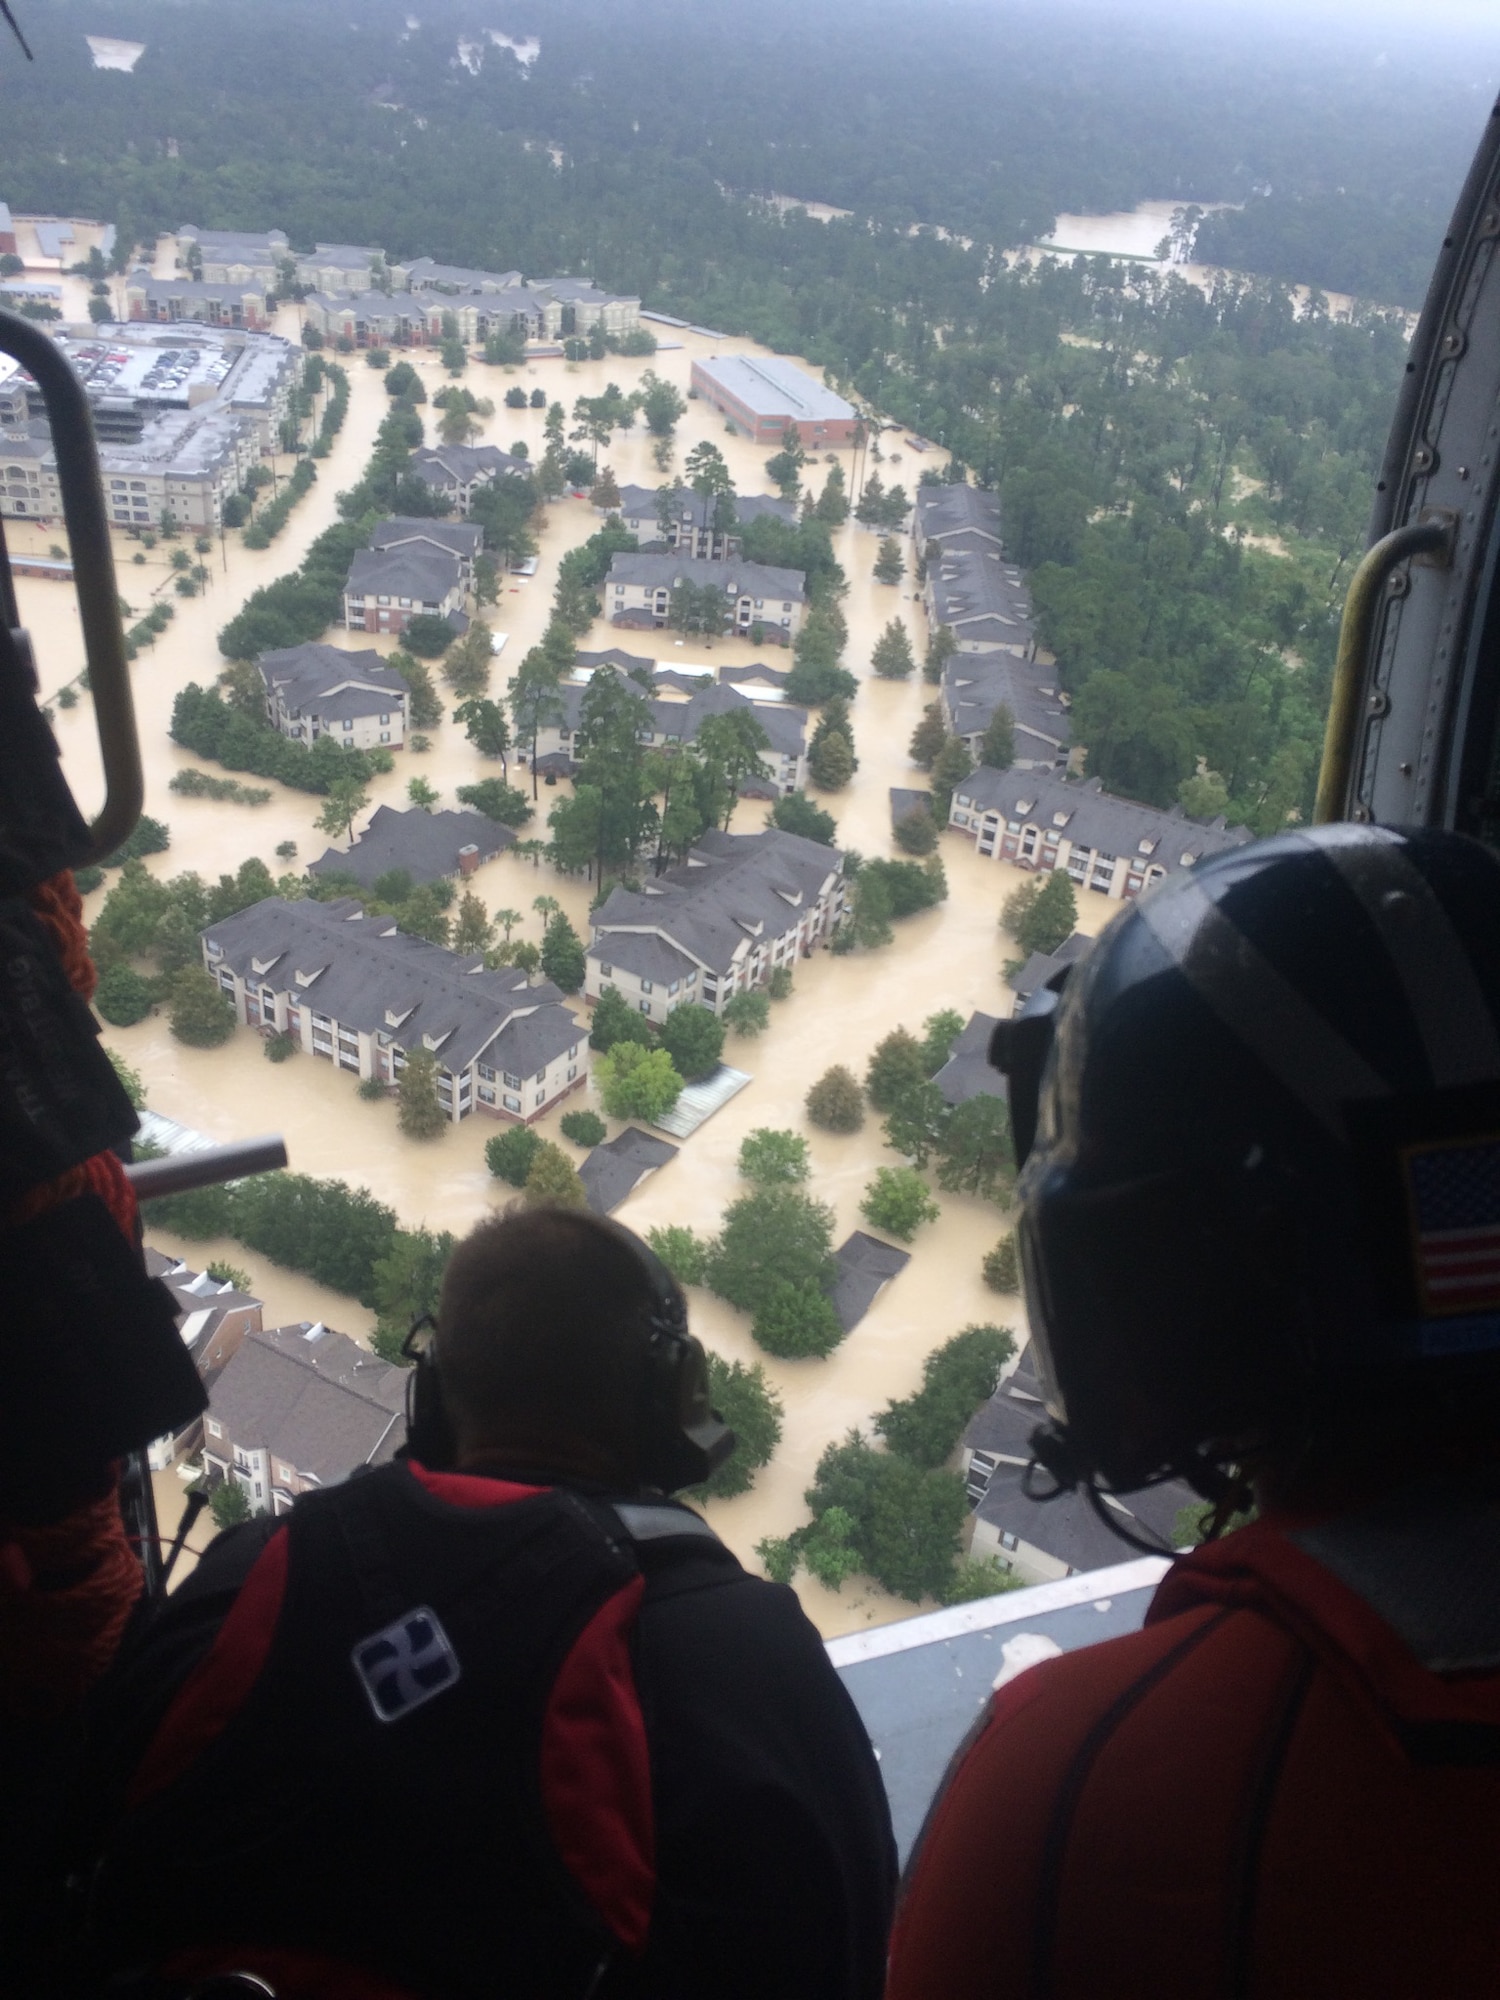 Kentucky Air Guardsmen conduct Hurricane Harvey rescue operations in Texas